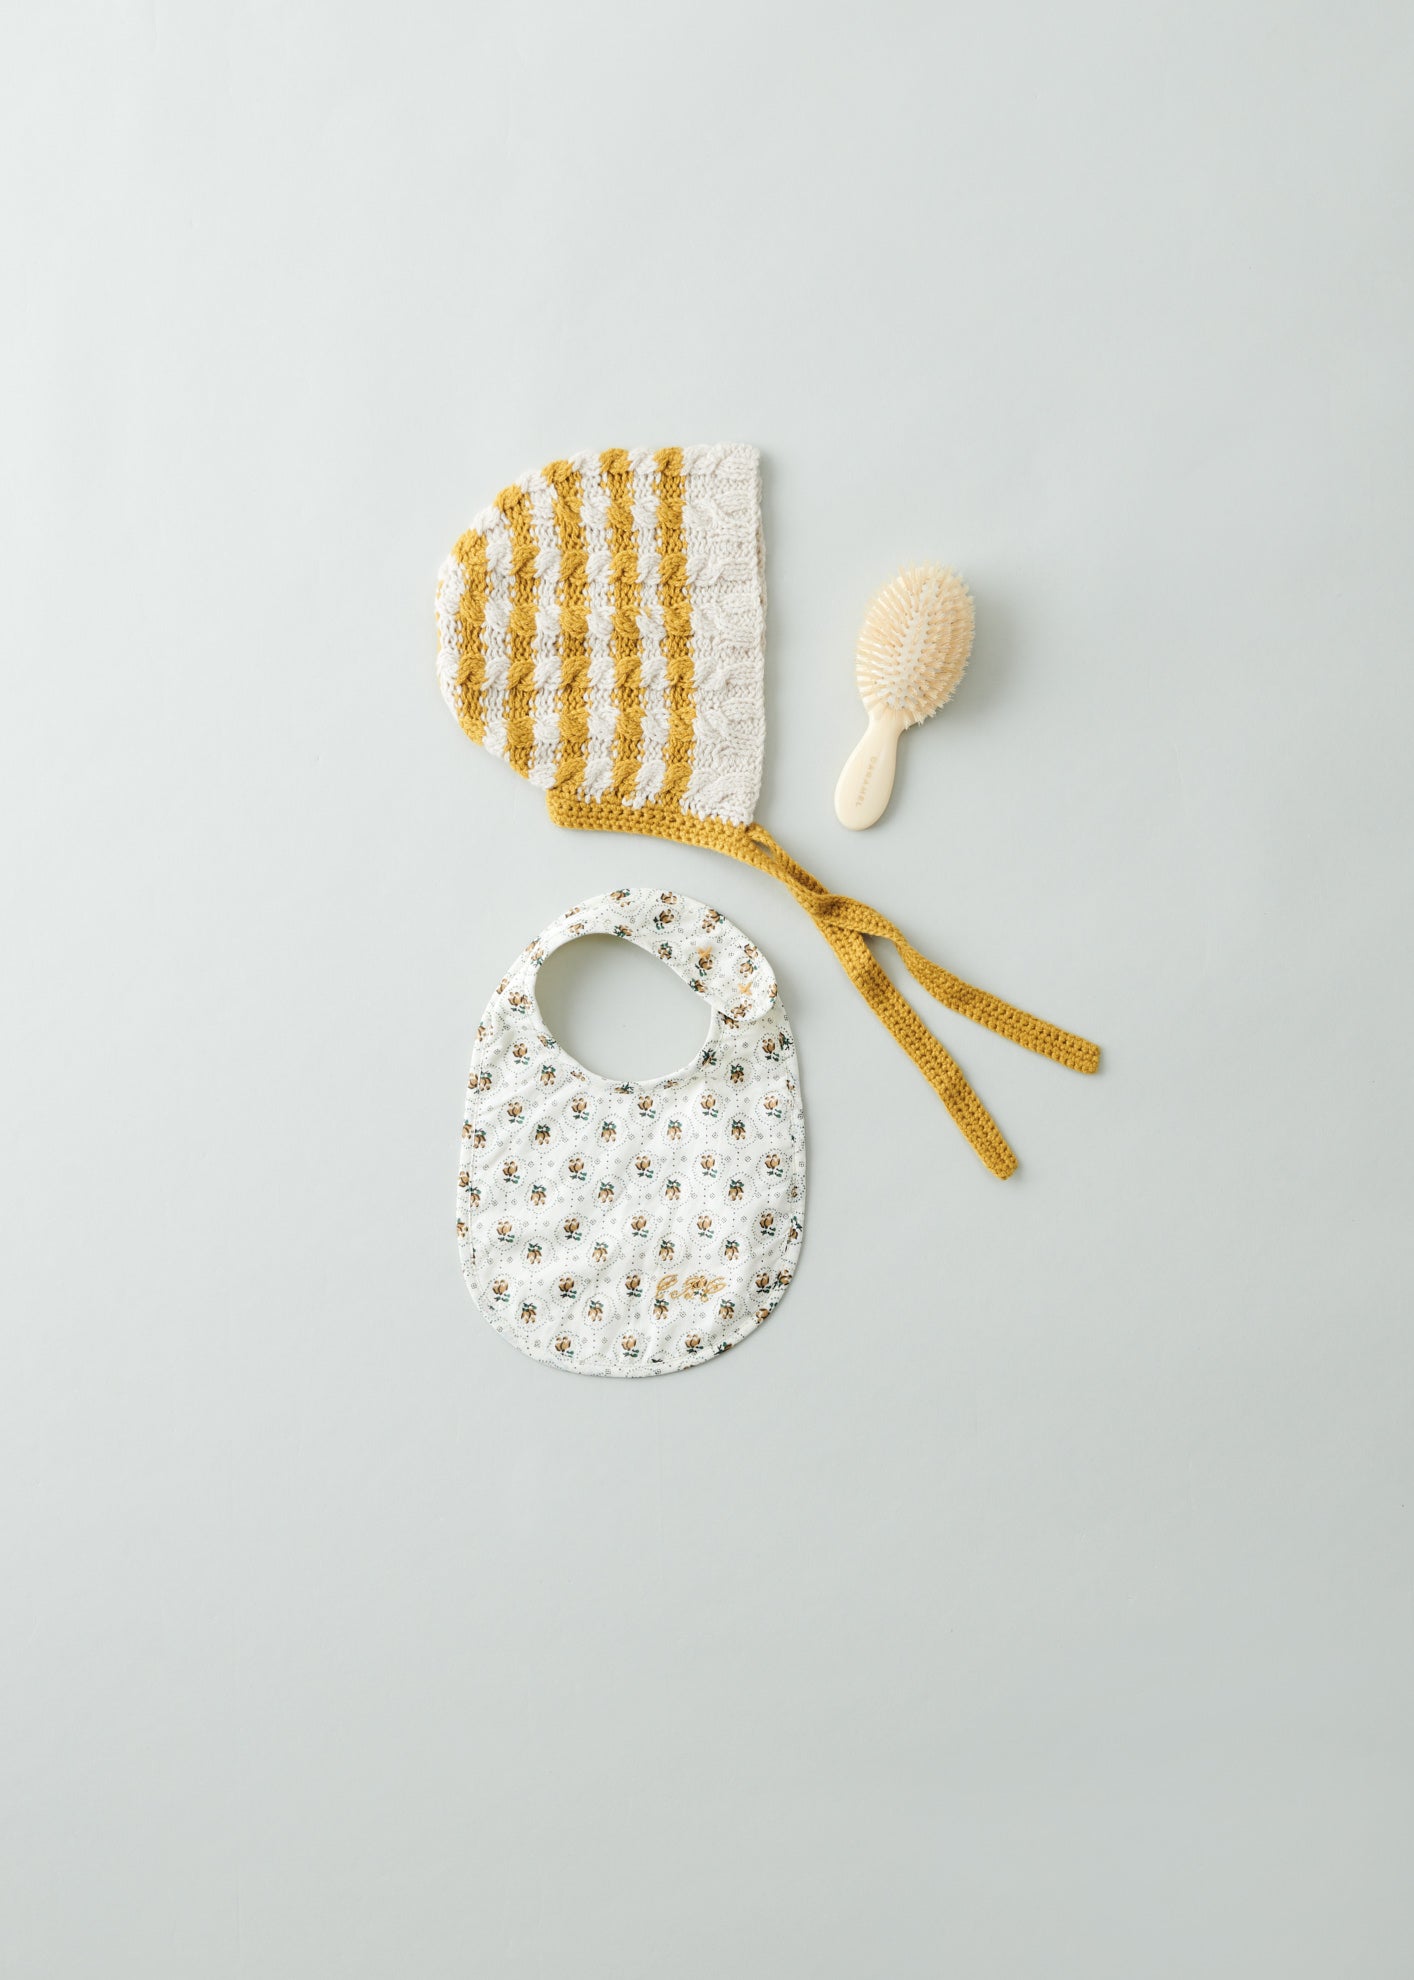 CURLEW BABY BONNET - YELLOW/WHITE